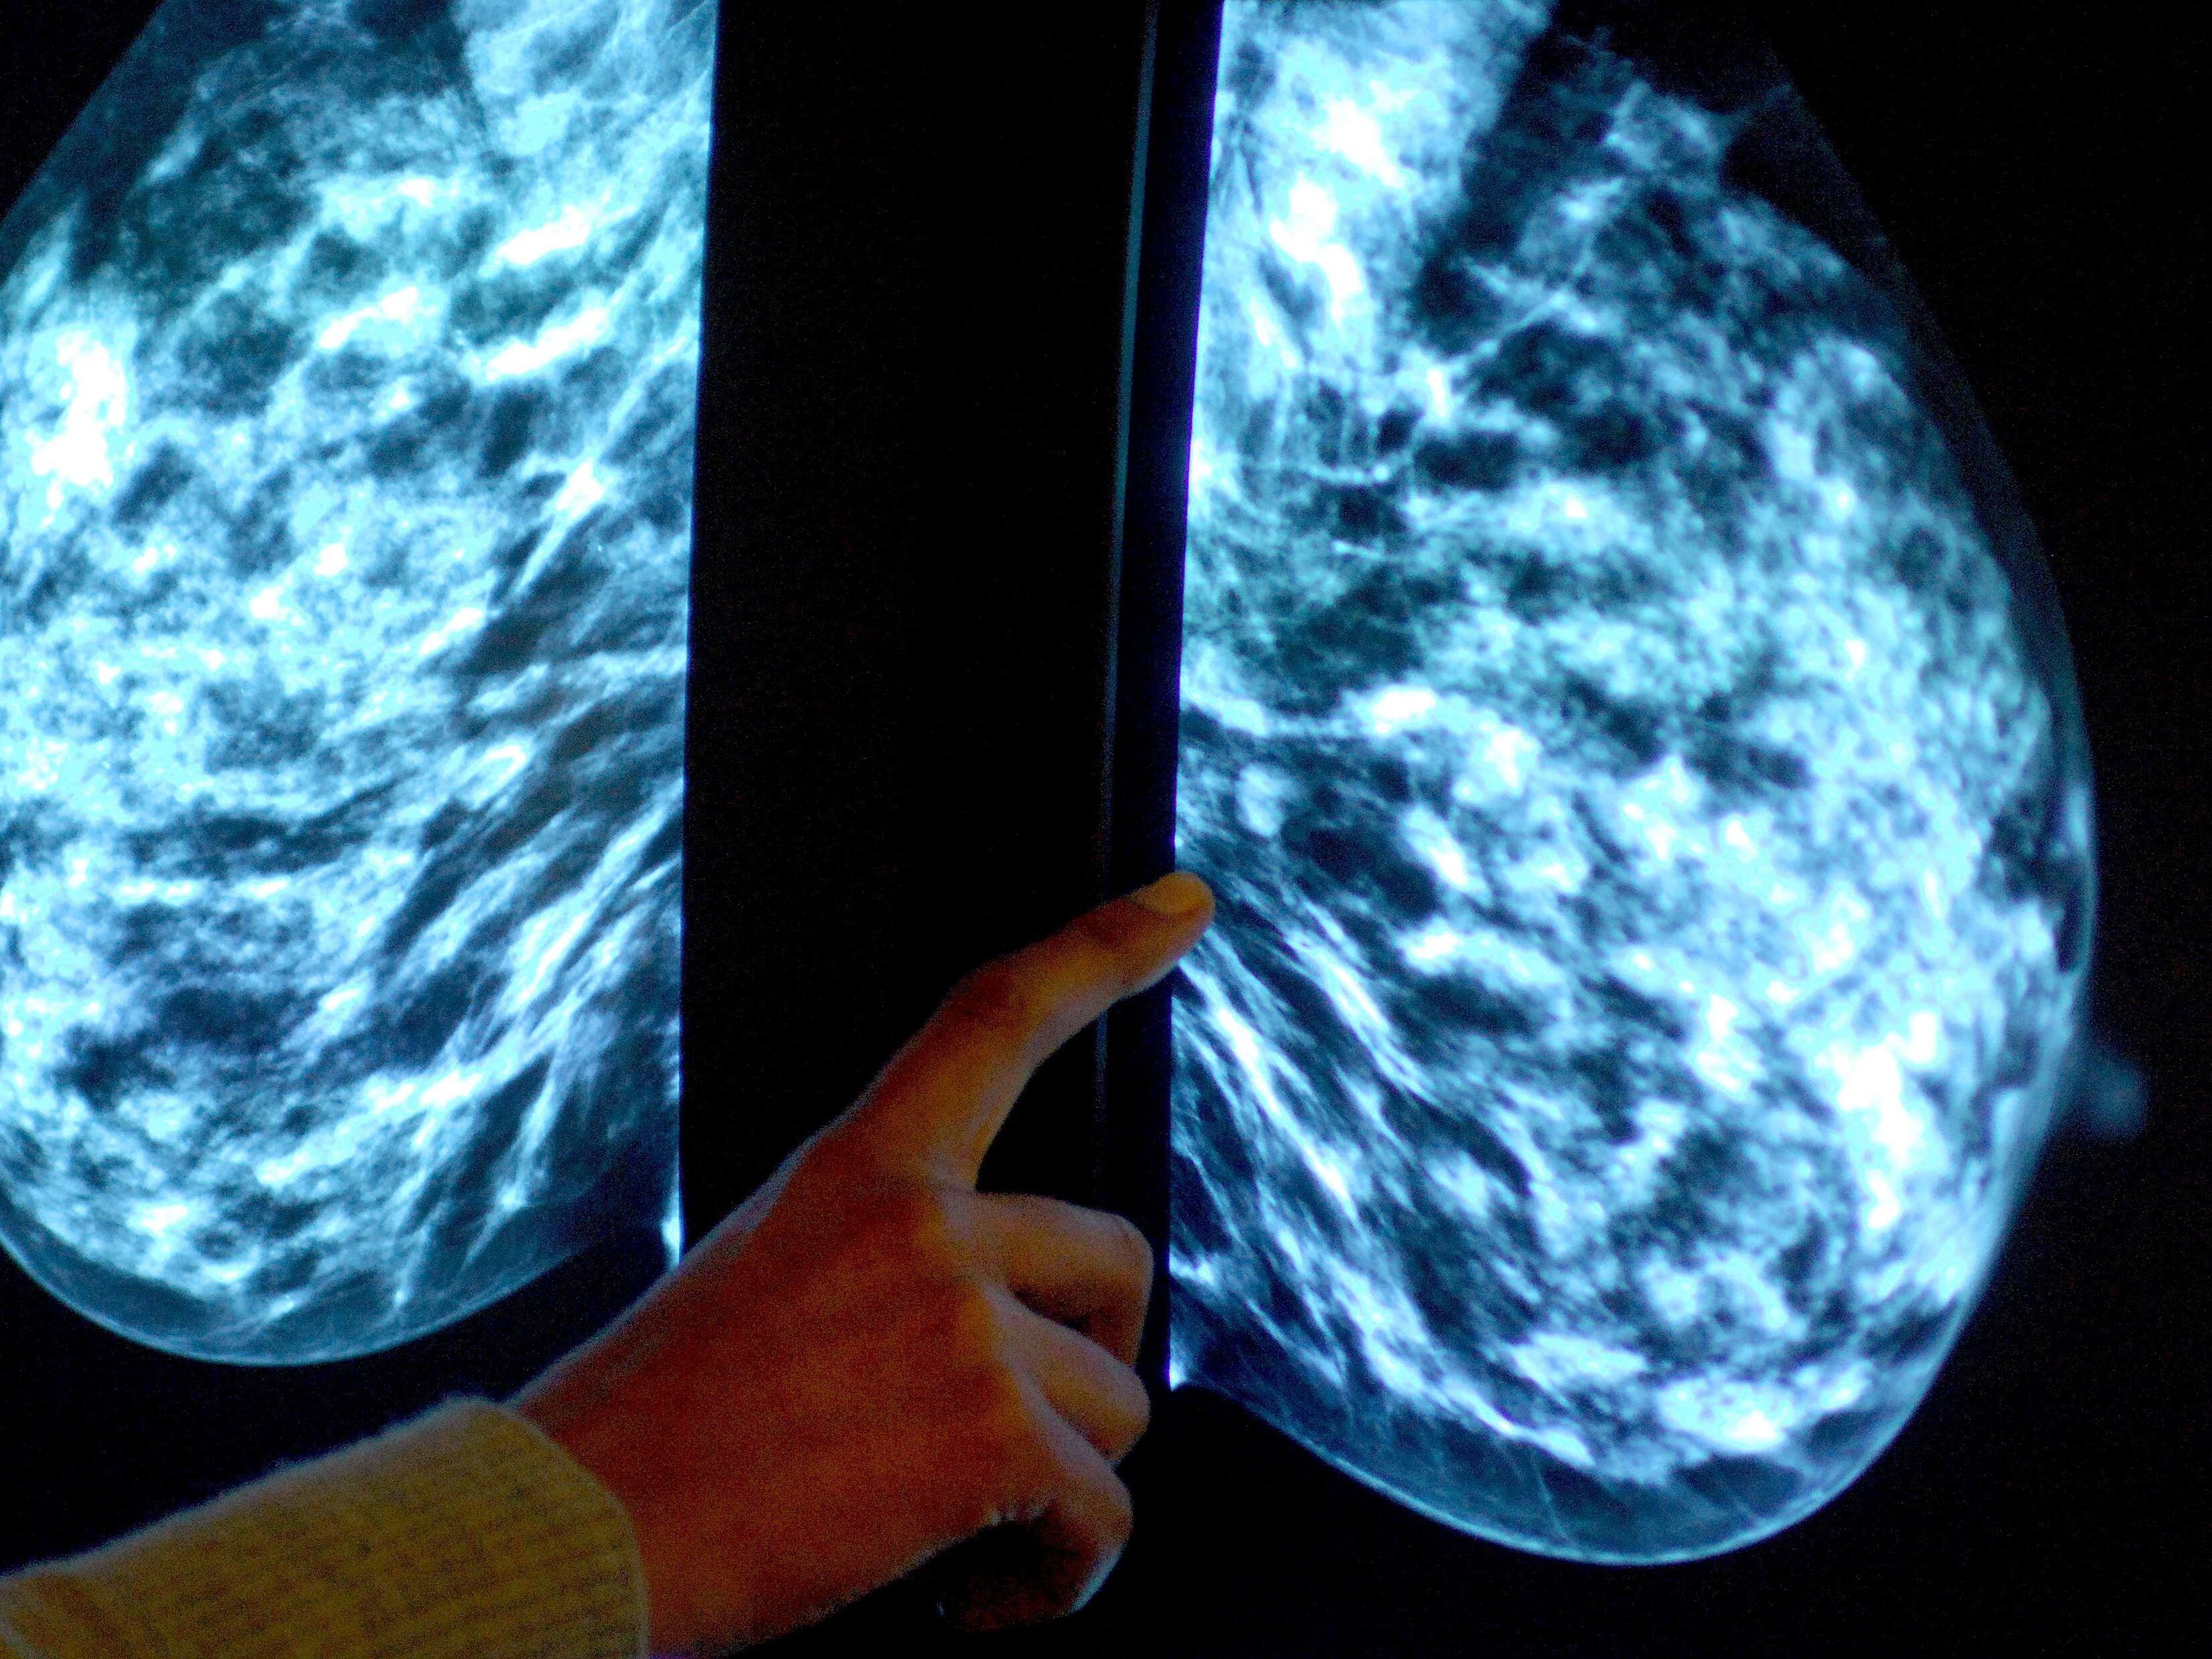 Health watchdog backs wider use of breast cancer tumour profiling tests